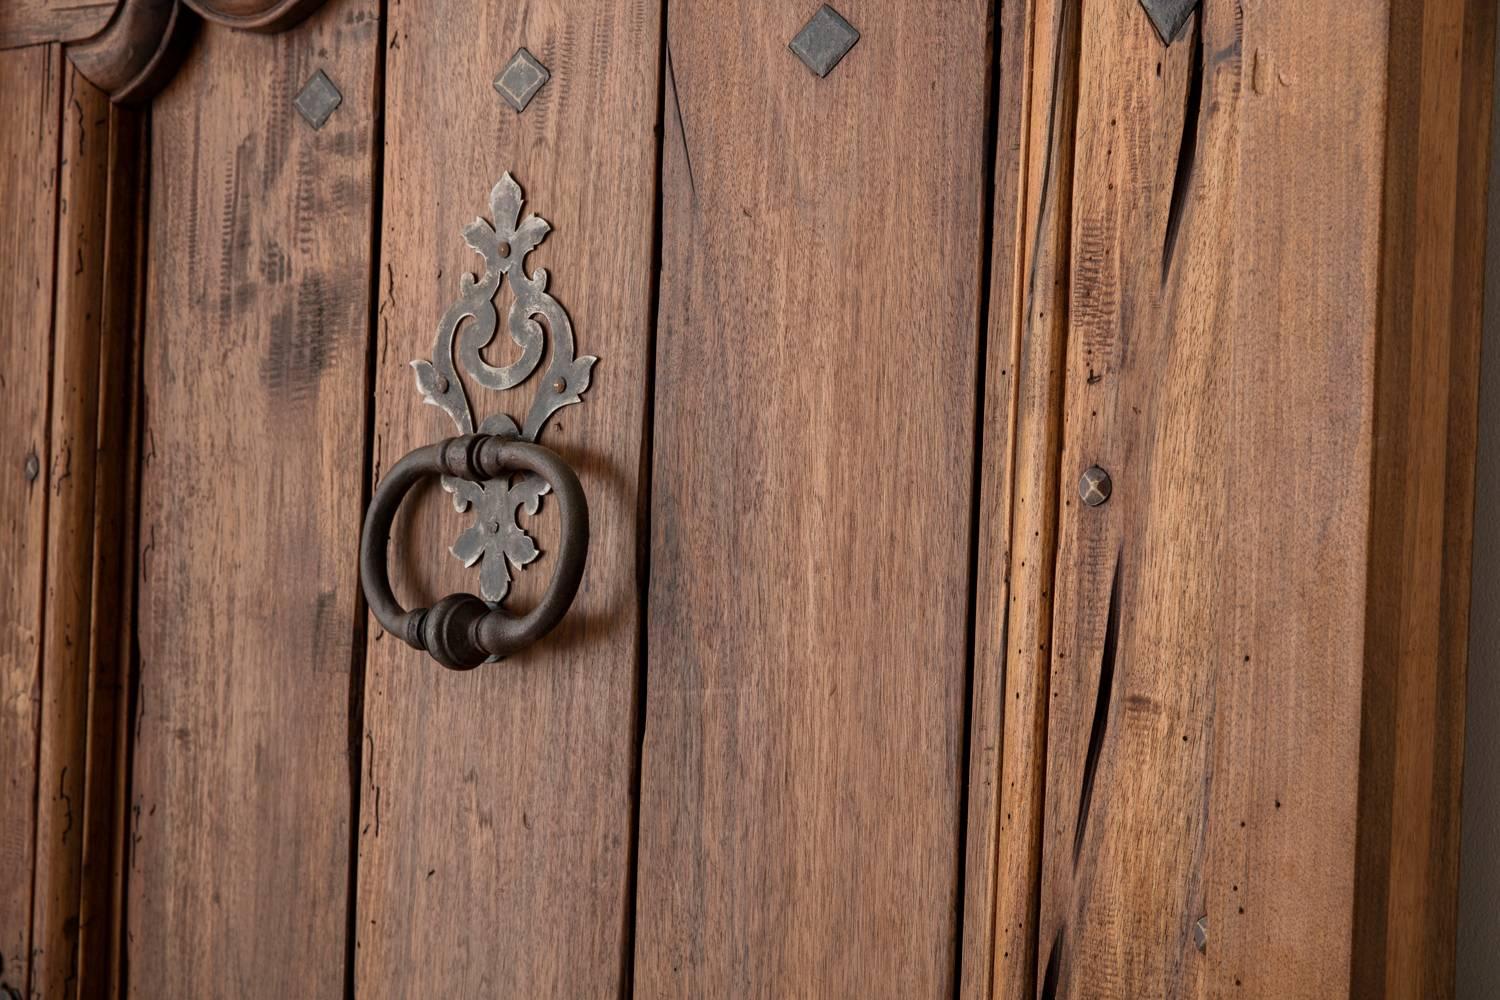 A newly constructed French Louis XV style walnut entry door made by Provençal artisans using traditional methods. This door features iron hardware and detailing typical of the Provençal style. Keys included.  The measurements provided are for the